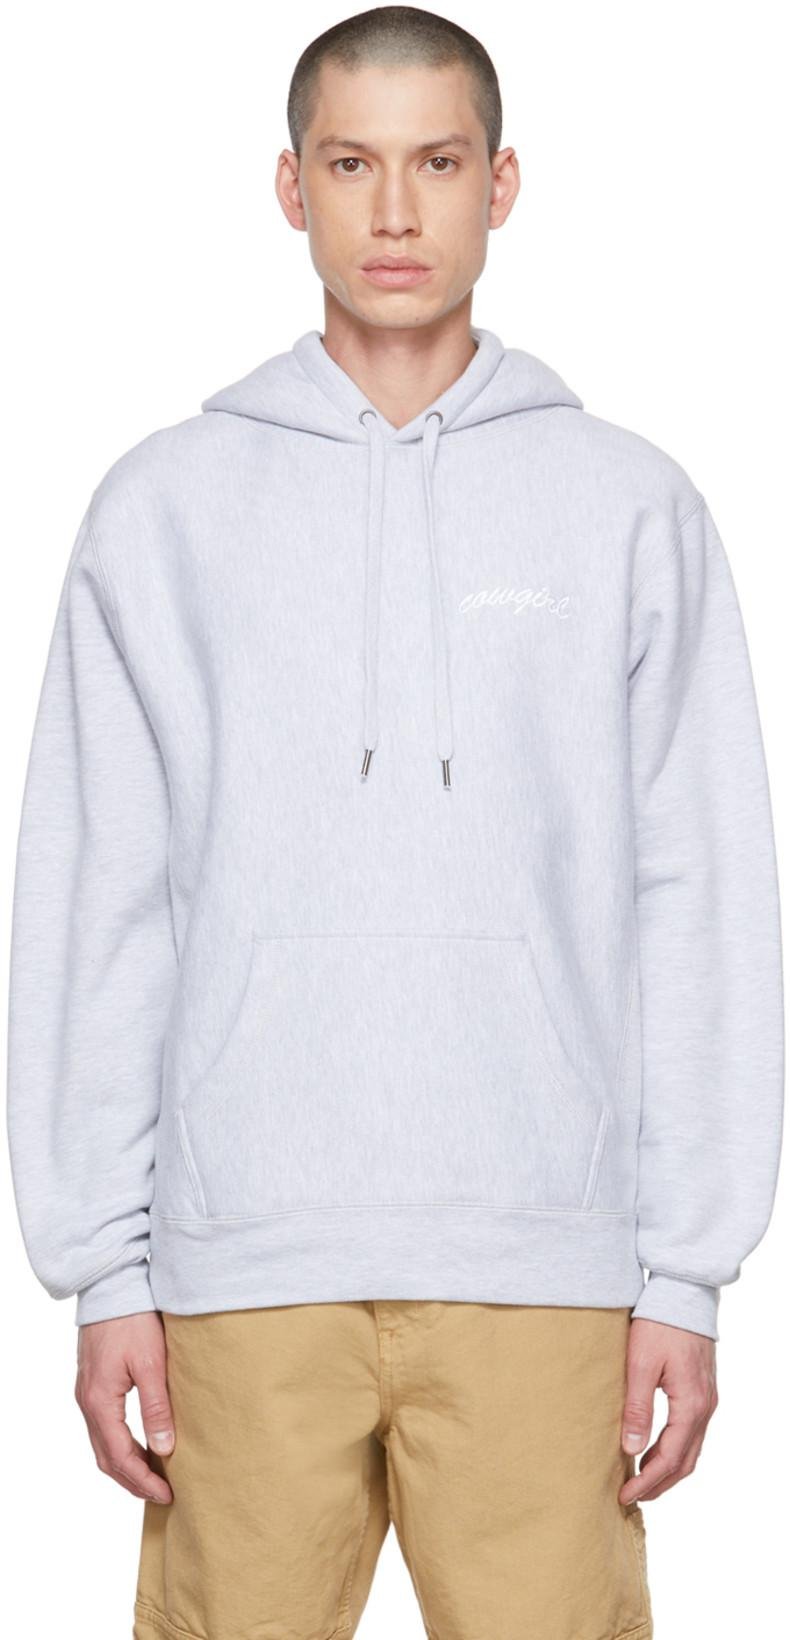 Gray Script Hoodie by COWGIRL BLUE CO